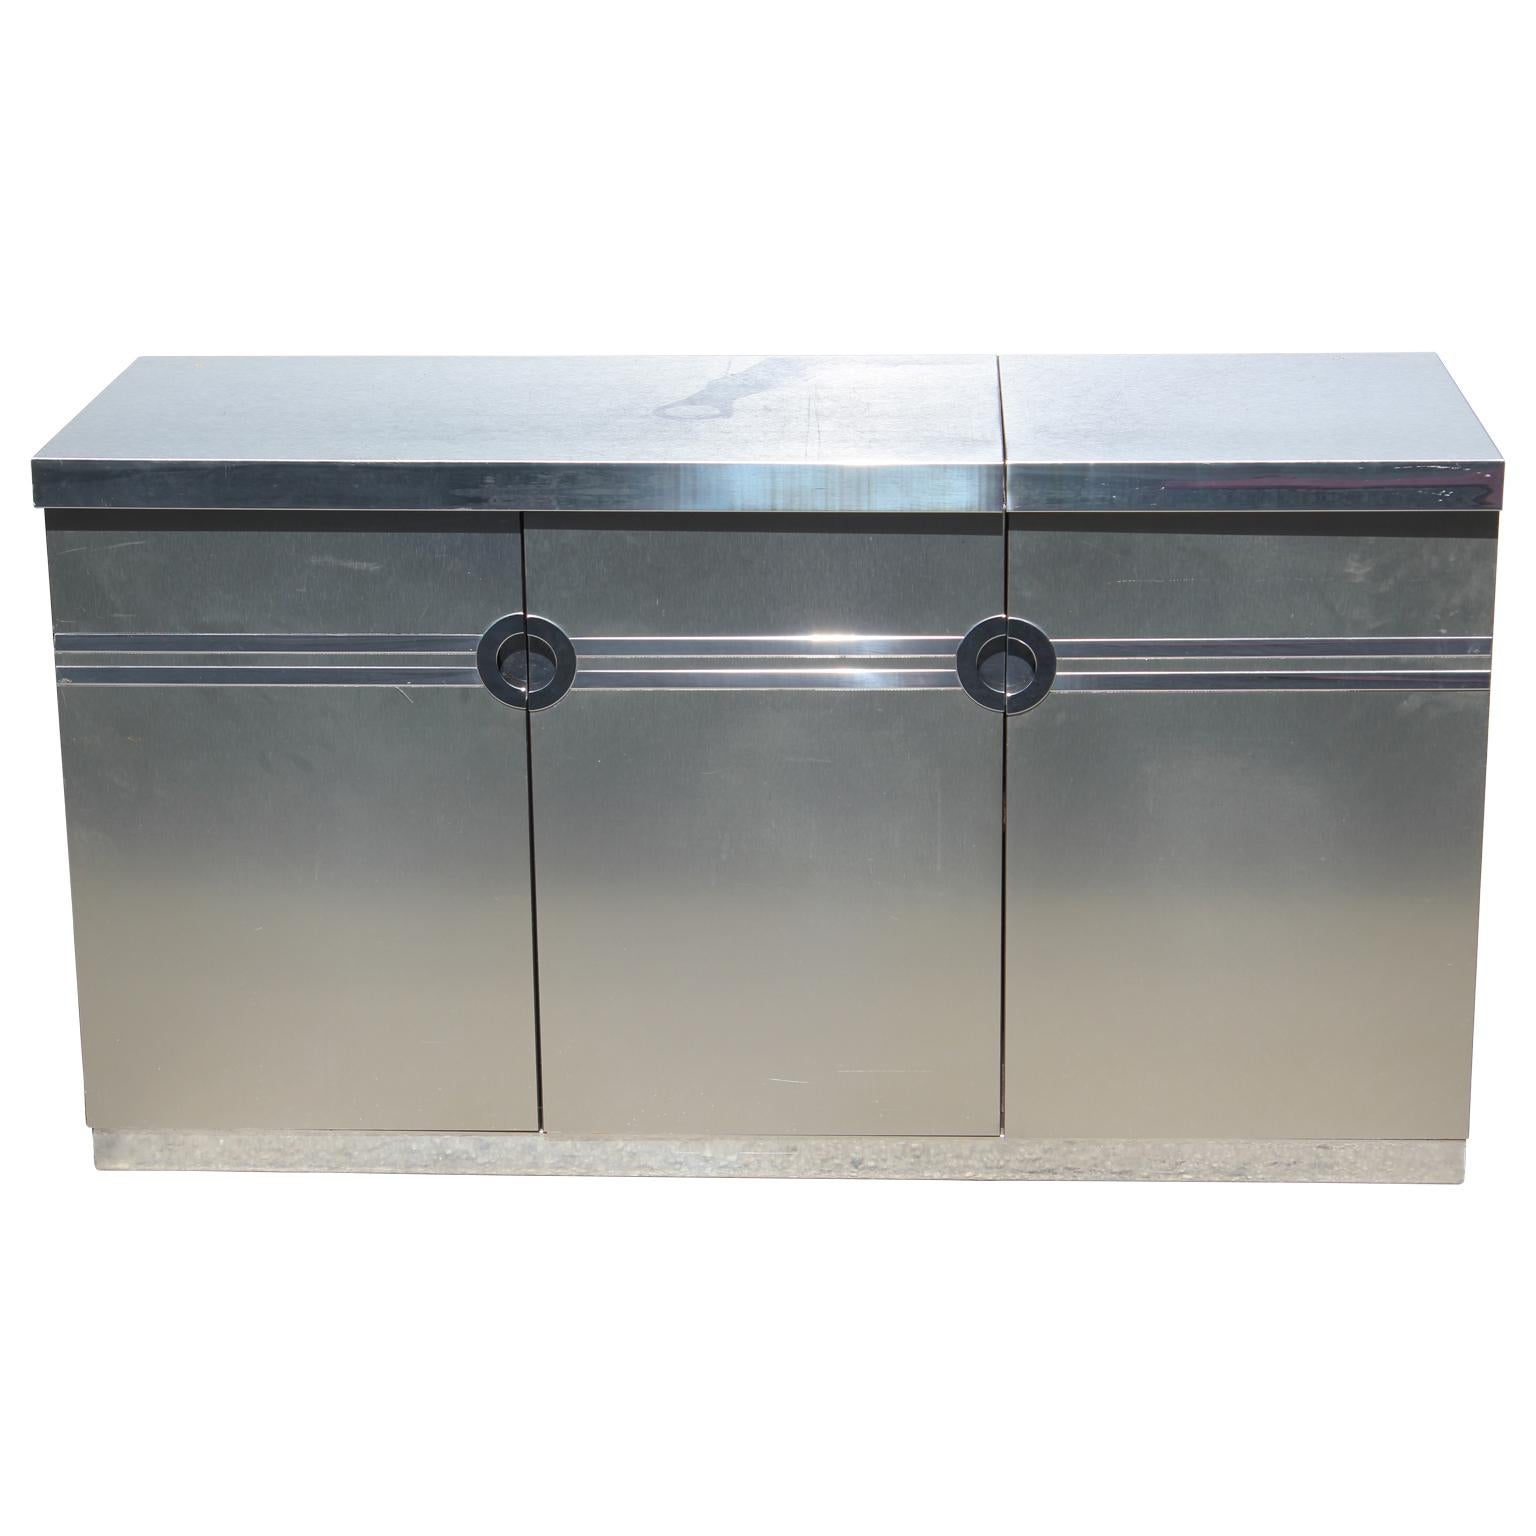 Gorgeous and sleek dry bar by Pierre Cardin made from brushed aluminium and outfitted with a chrome top that flips up to reveal an ice bucket and a place to store glasses with a mirrored lining.